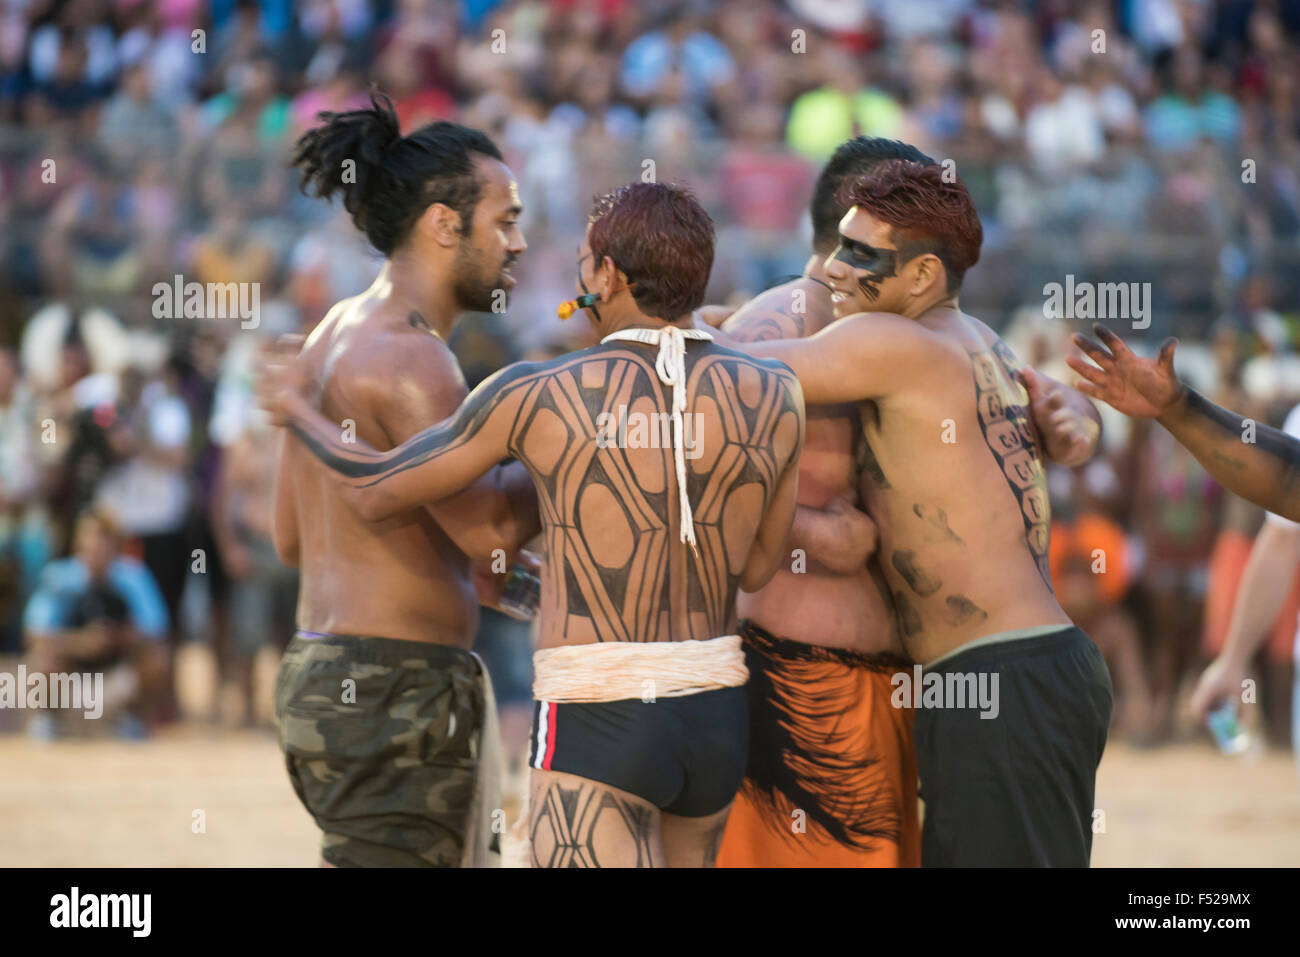 Palmas, Tocantins State, Brazil. 25th October, 2015. Kuikuro and Maori contestants congratulate each other and embrace in friendship after a tug of war at the International Indigenous Games, in the city of Palmas, Tocantins State, Brazil. The Brazilian Kuikuro won the bout. Credit:  Sue Cunningham Photographic/Alamy Live News Stock Photo